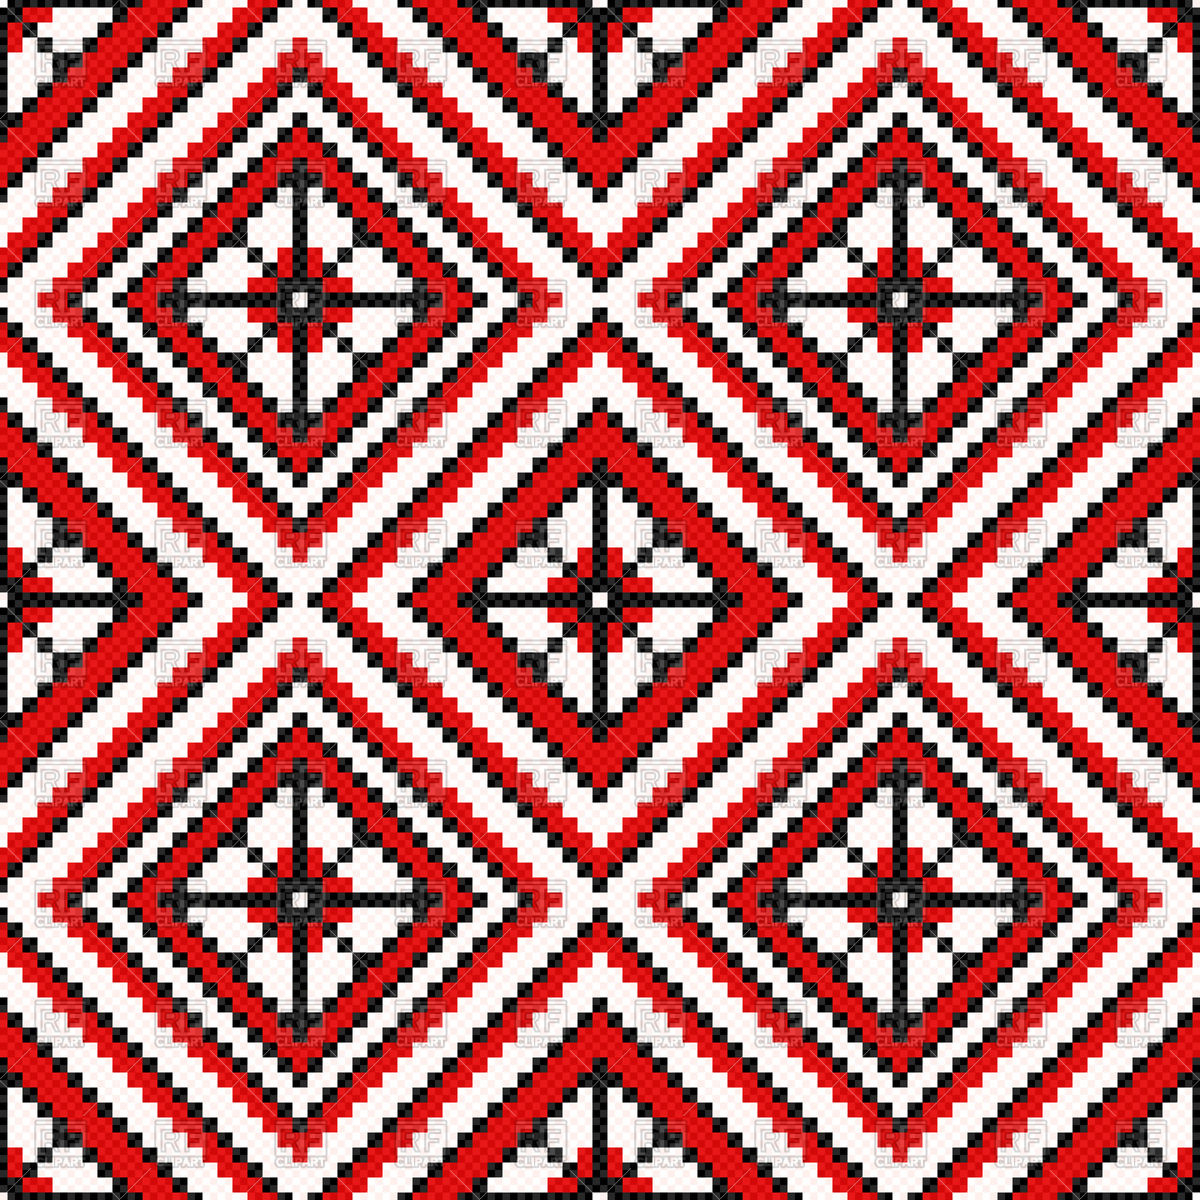 Ukrainian Embroidery Patterns Ethnic Ukrainian Geometric Embroidery In Red And Black Hues Seamless Pattern Stock Vector Image